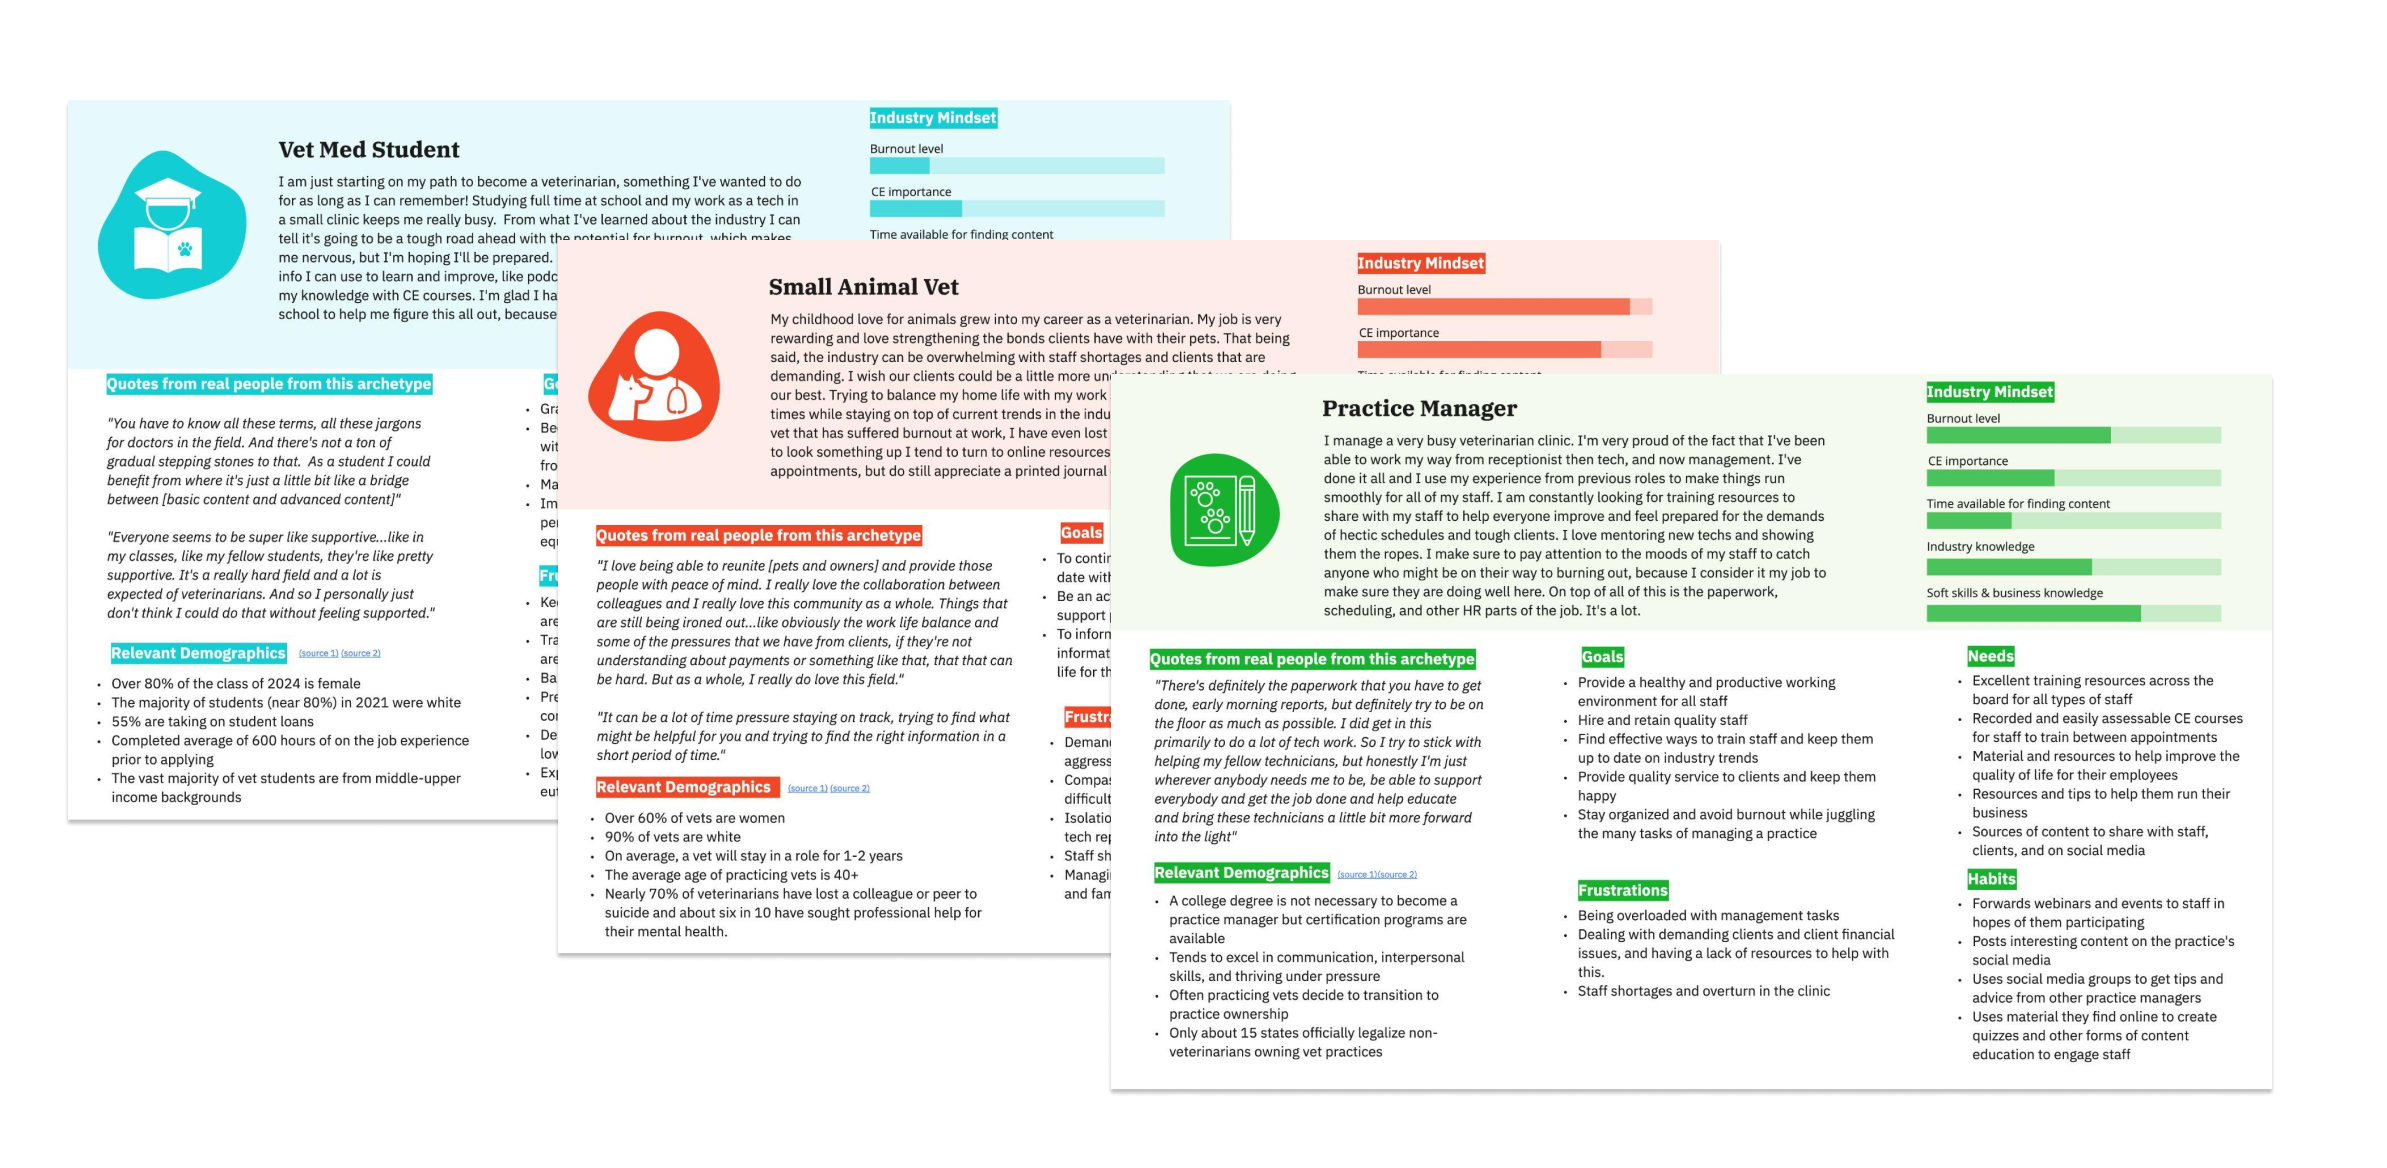 A set of three posters for Vet Med student, Small animal vet, and practice manager showing bullet points of quotes, goals, frustrations, needs, and habits 